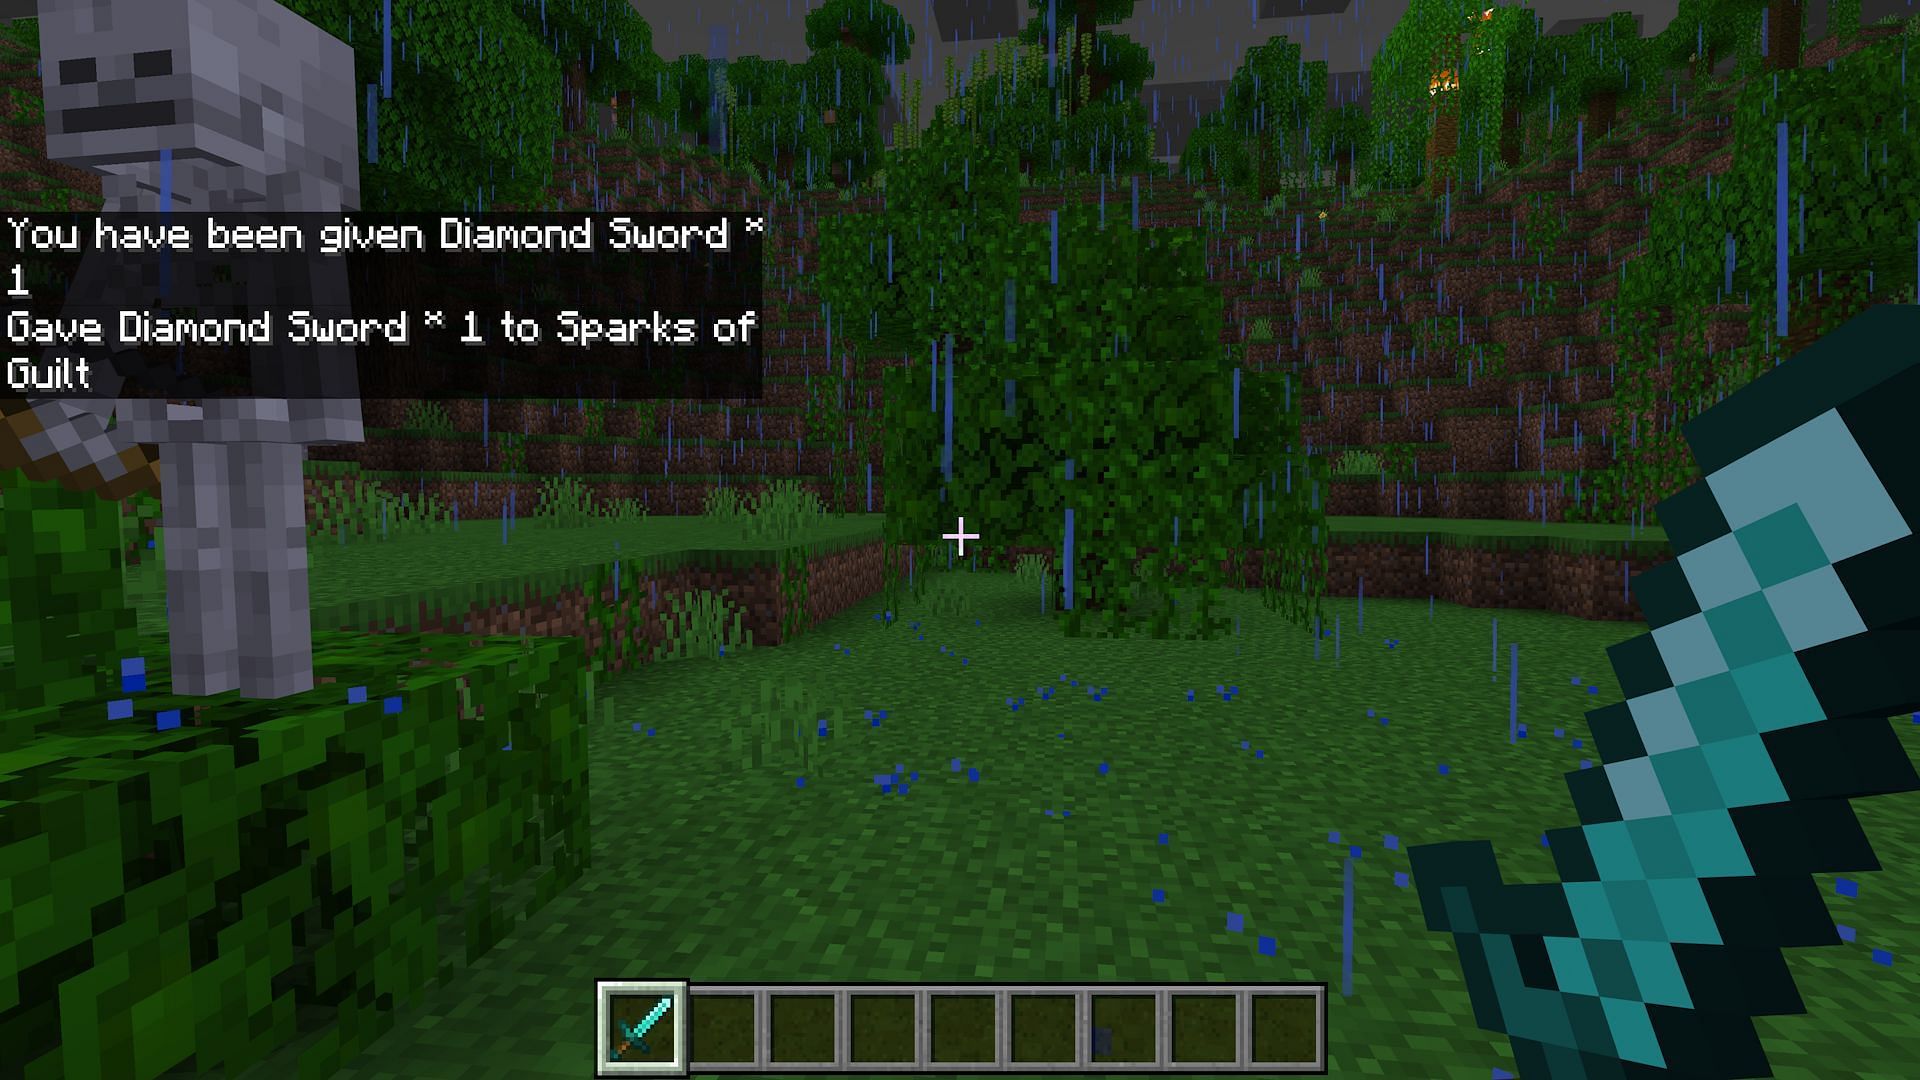 The give command is useful to know for niche situations (Image via Mojang)